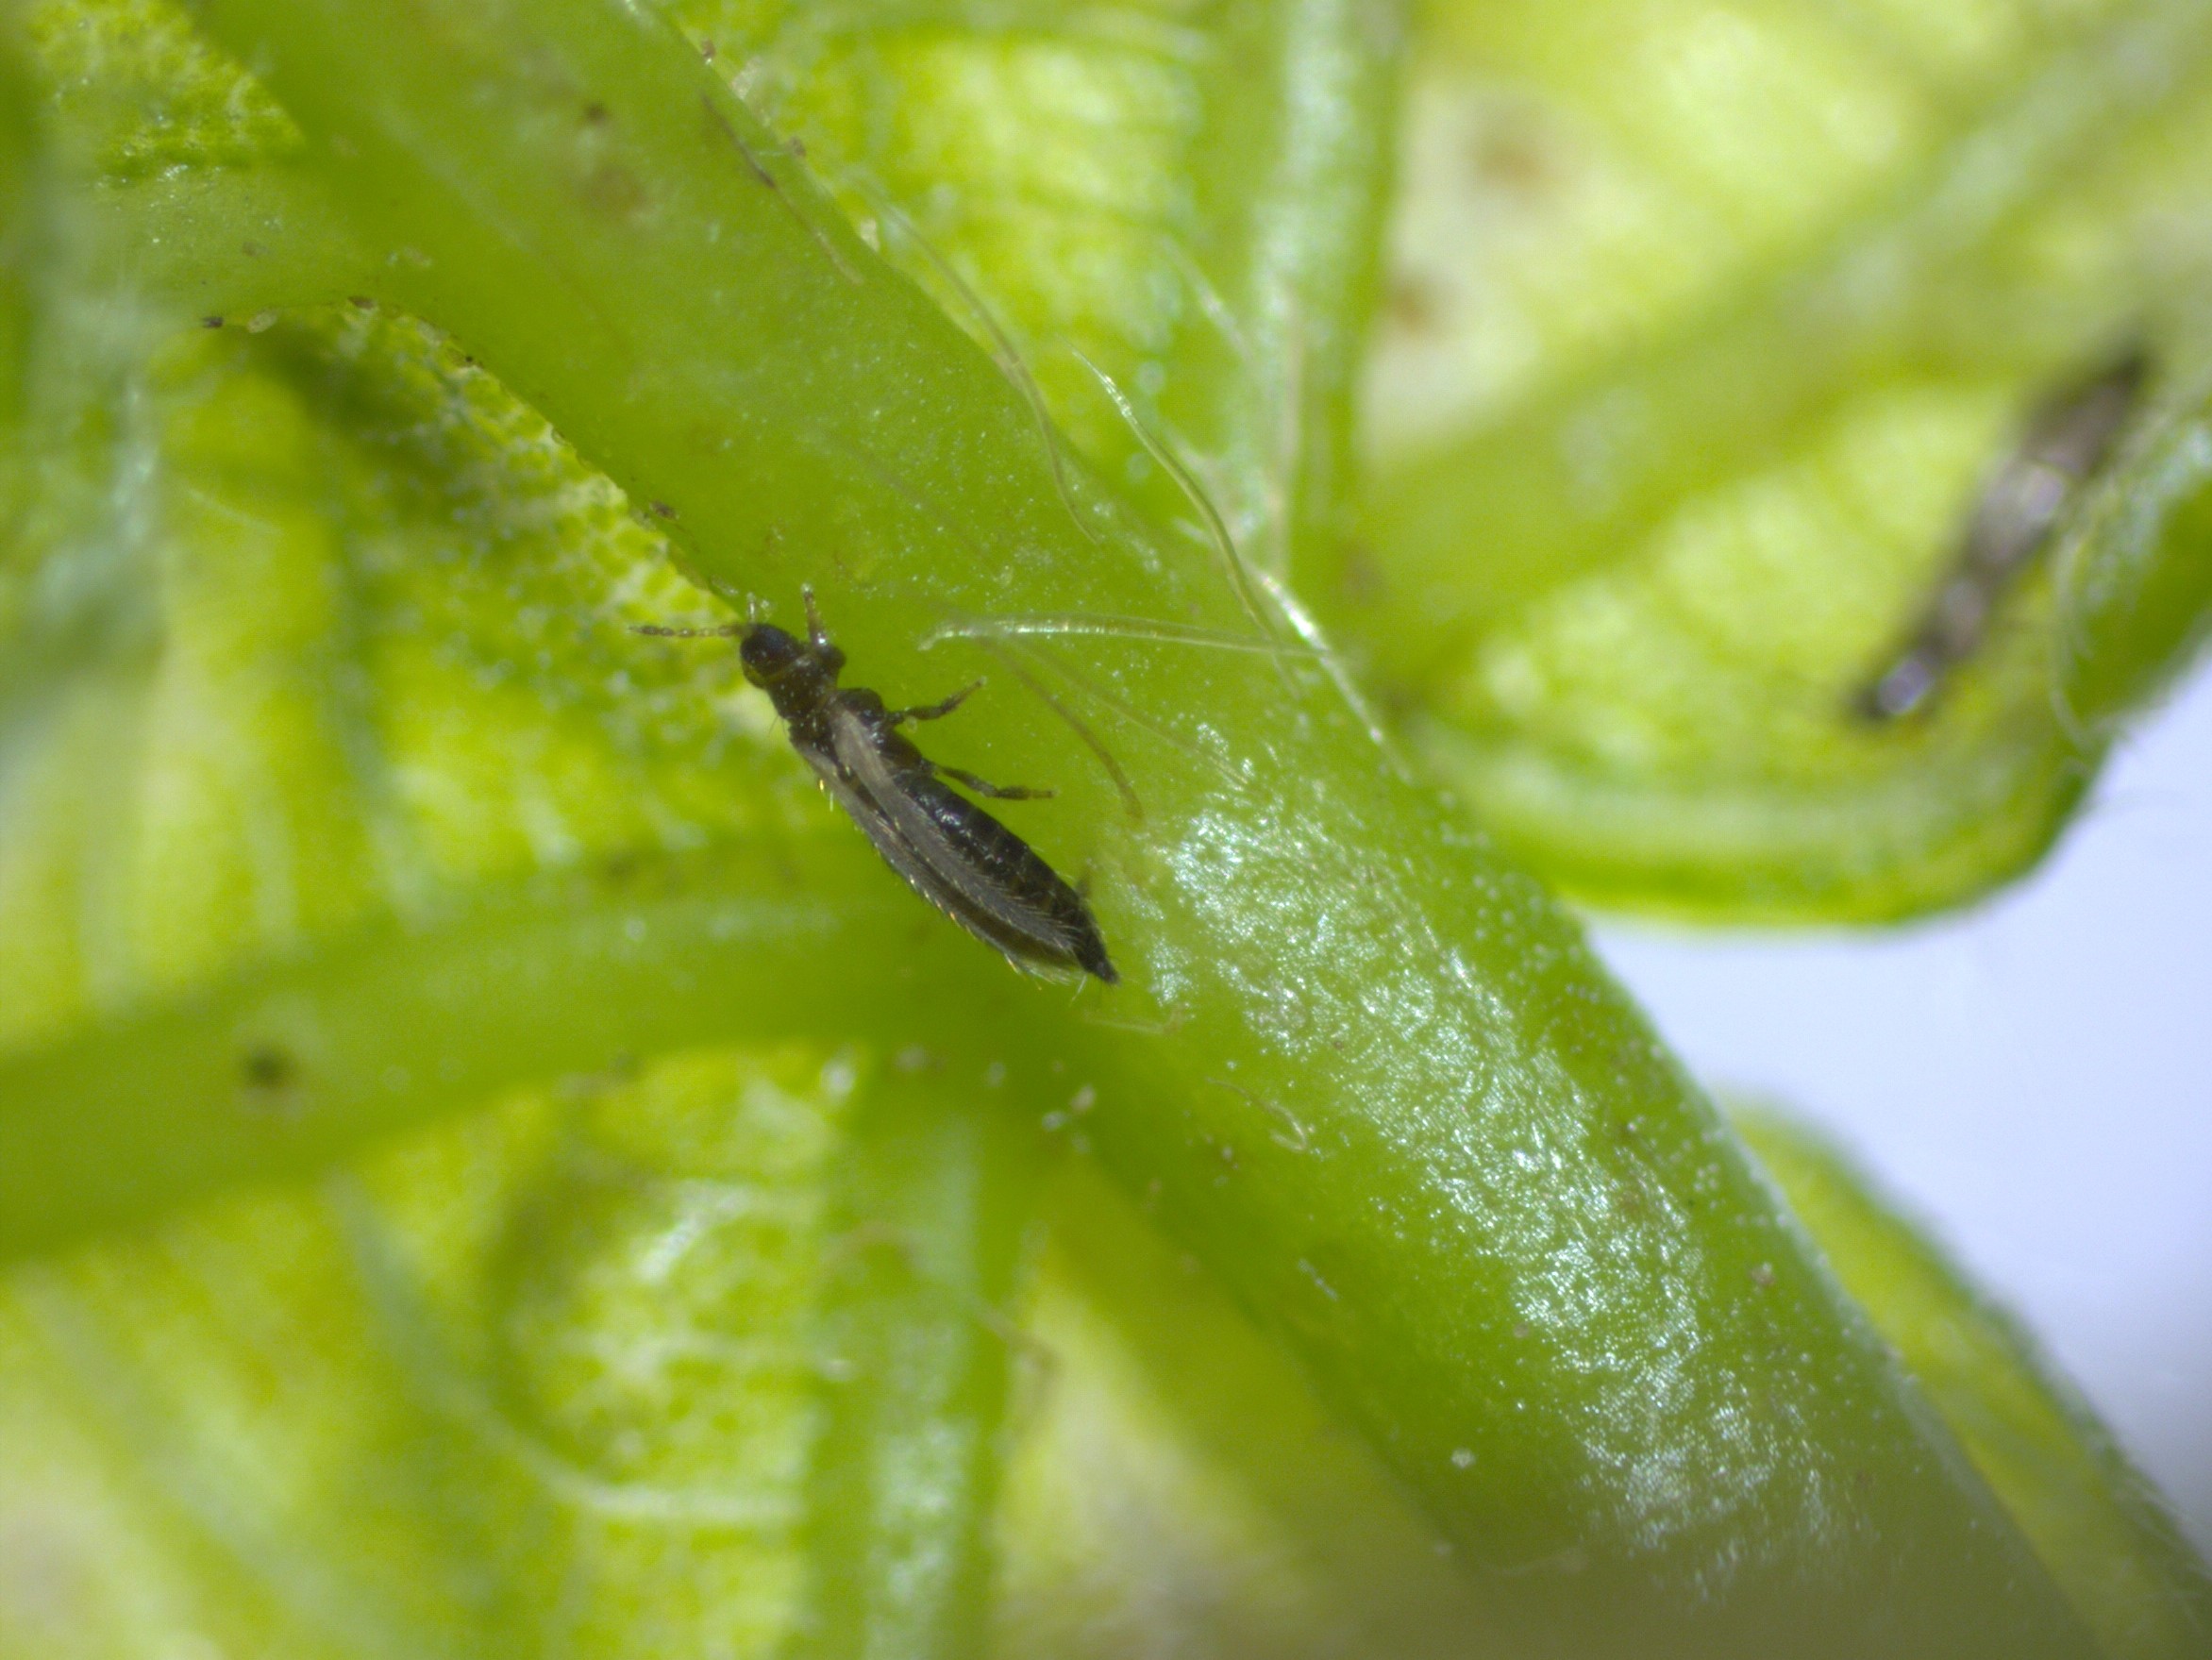 A long and thin introduced basswood thrips rests on the underside of a small green leaf.